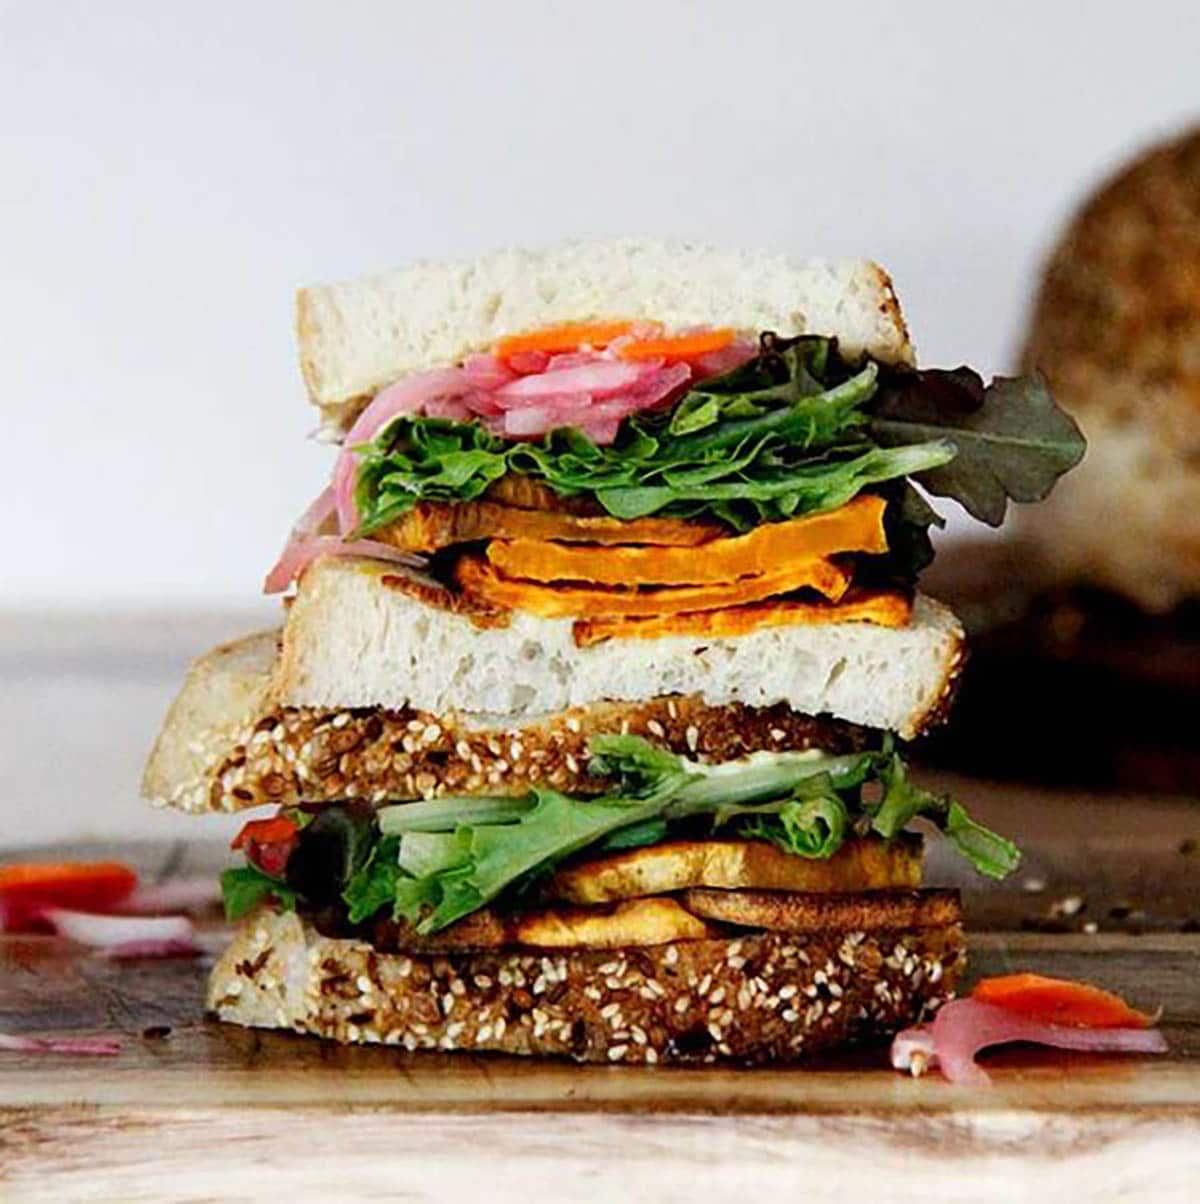 Roasted Sweet Potatoes, Pickled Beets, Aioli, and Goat’s Cheese Sandwich